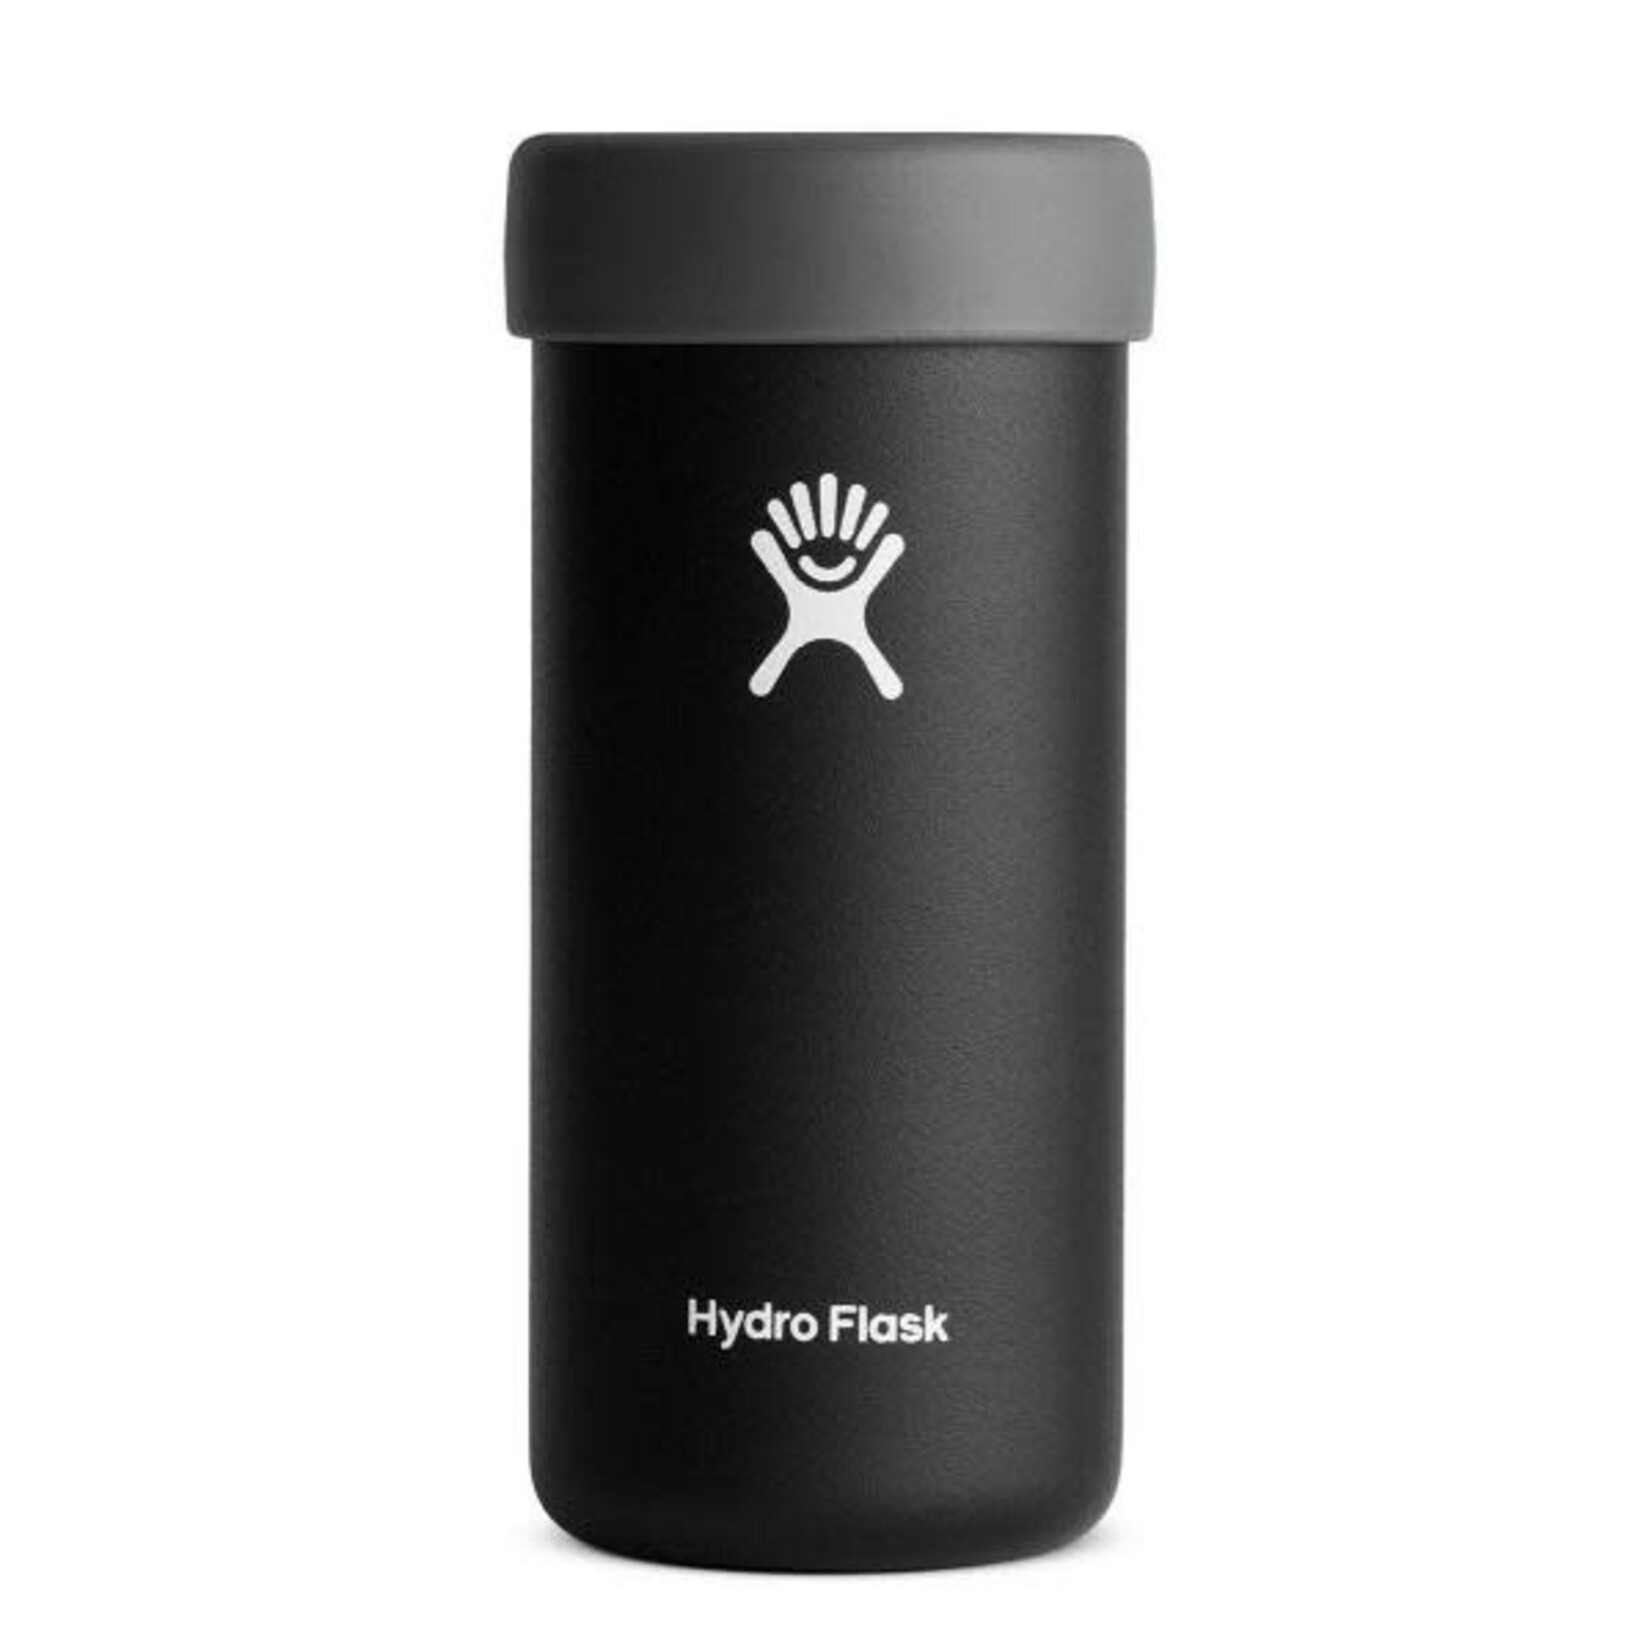 HYDROFLASK Hydro Flask 12 OZ Slim Cooler Cup